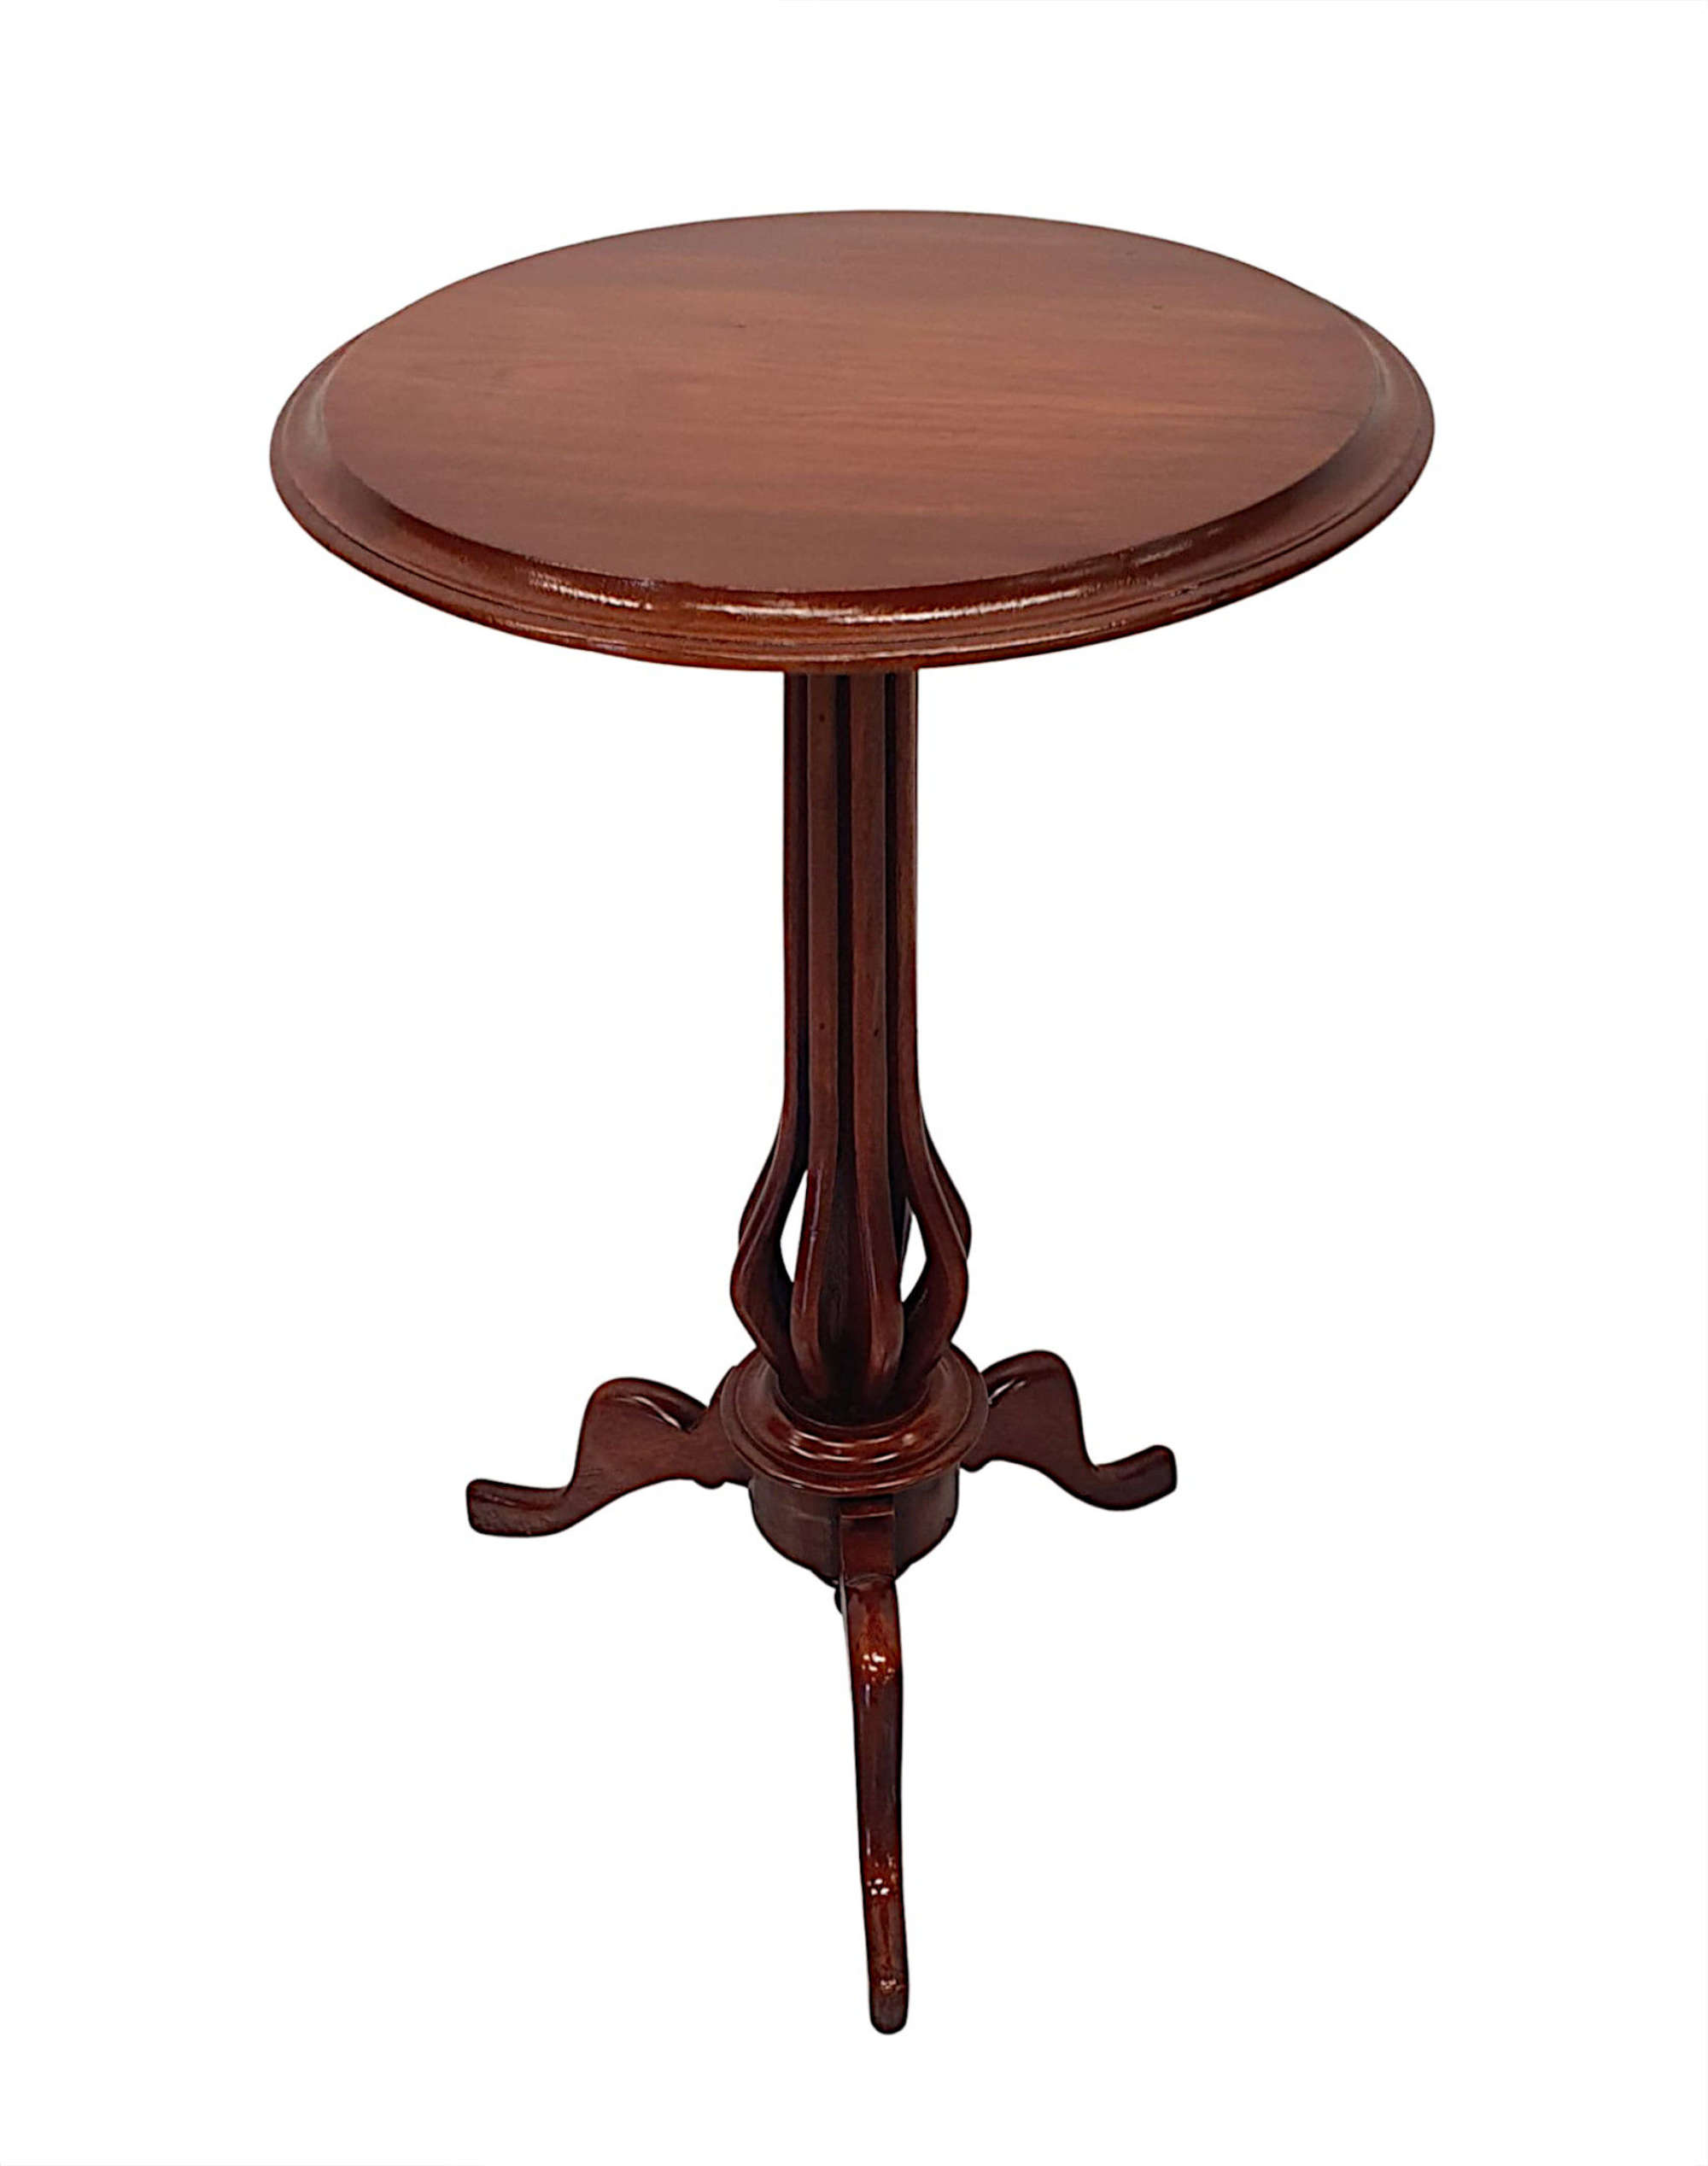 A Gorgeous 19th Century Occasional or Wine Table